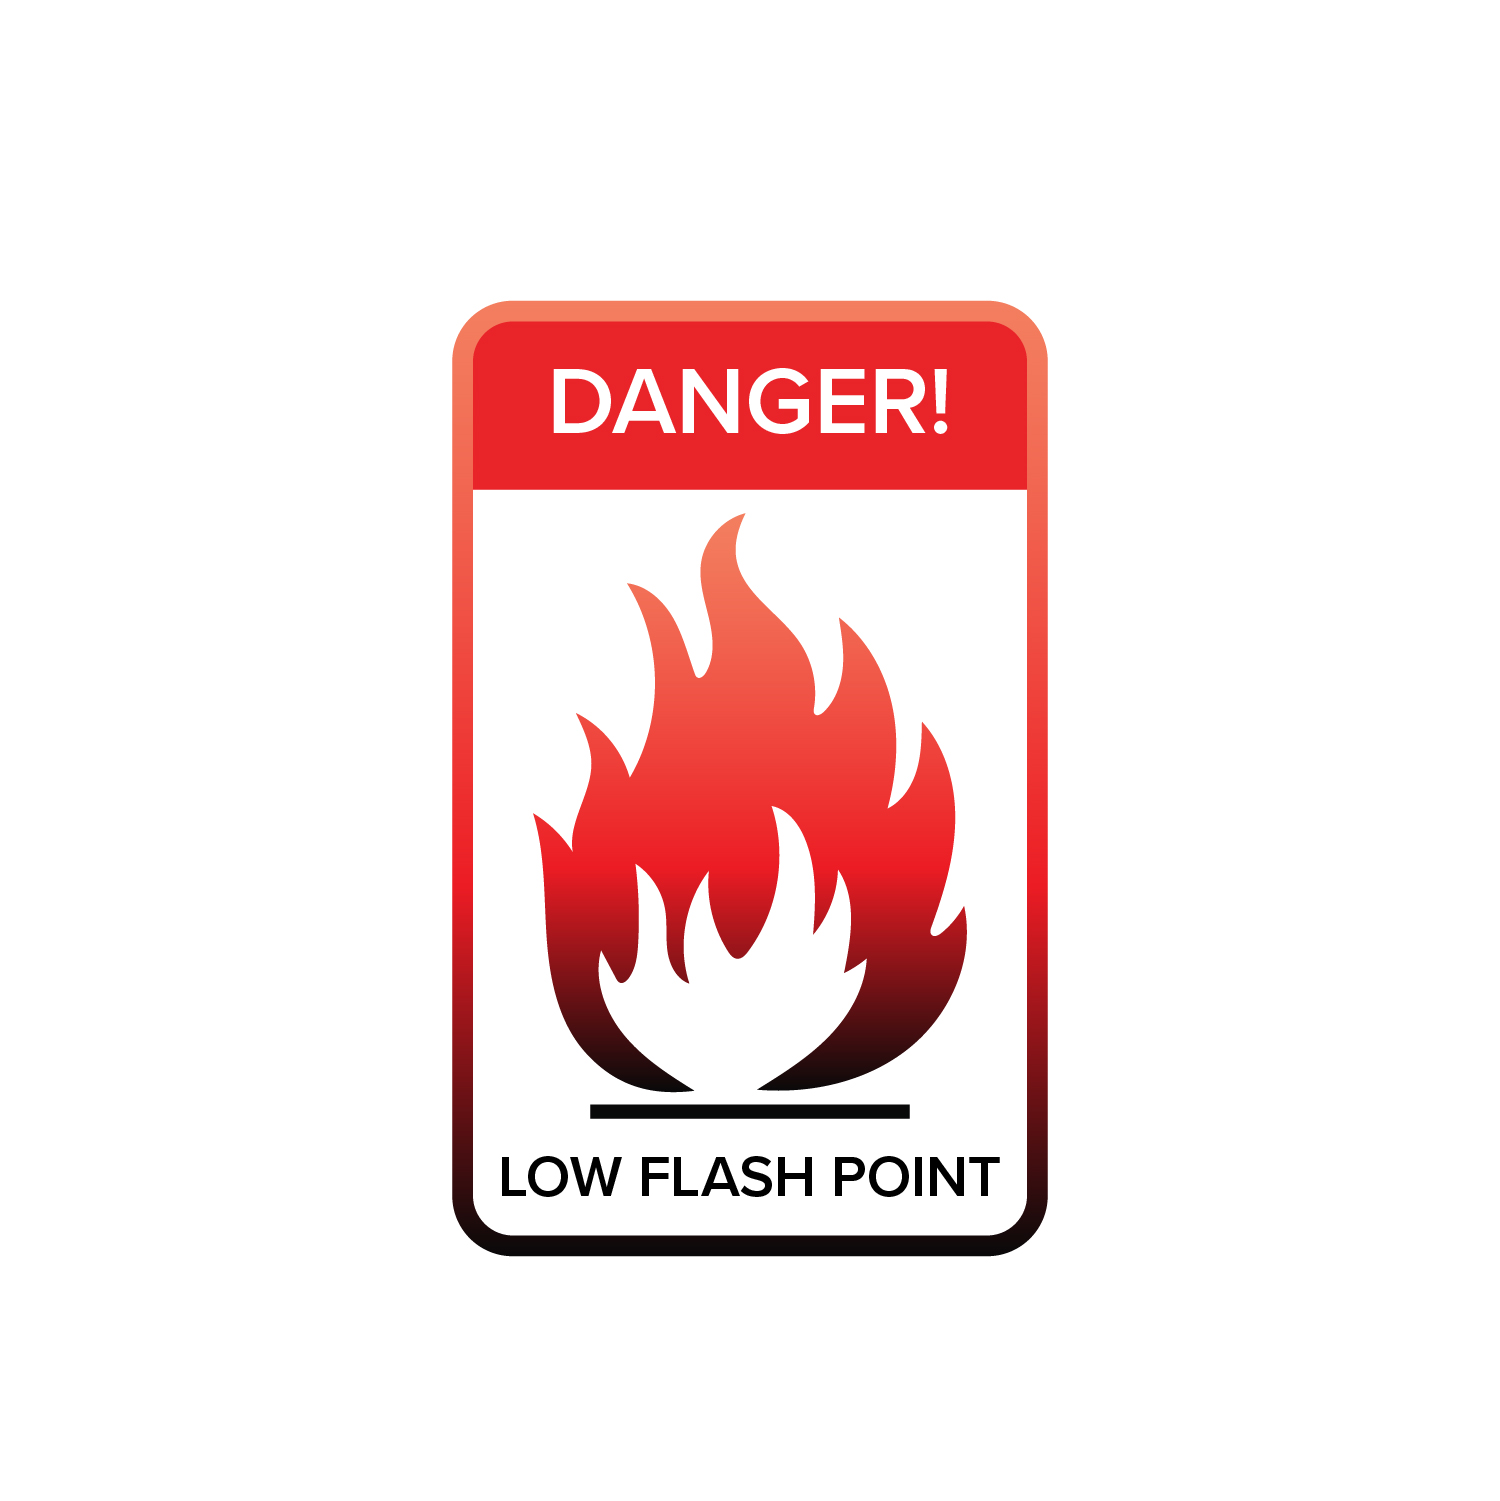 What is flash point or ignition temperature?